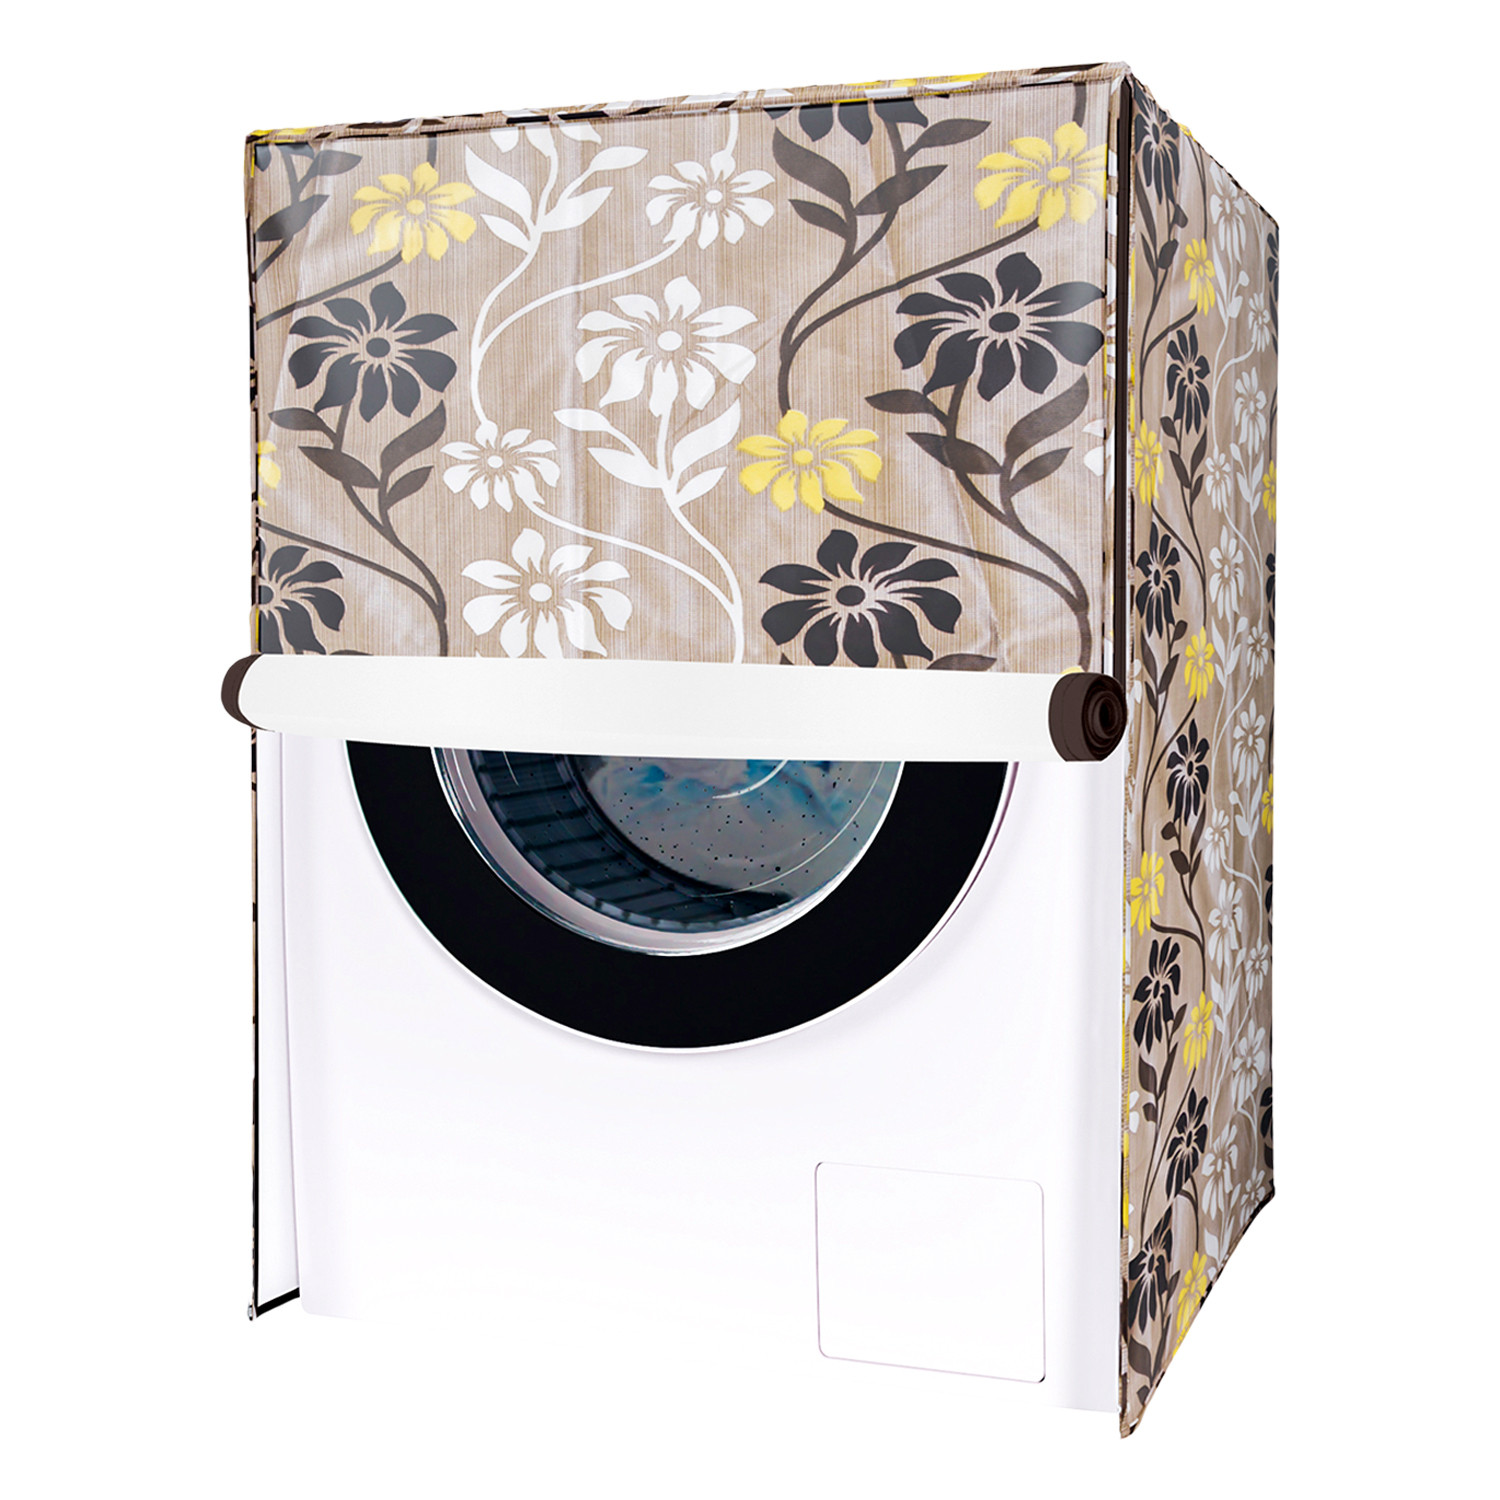 Kuber Industries Washing Machine Cover | Golden Flower Print Washing Machine Cover | Knitting Polyester | Front Load Washing Machine Cover | Brown